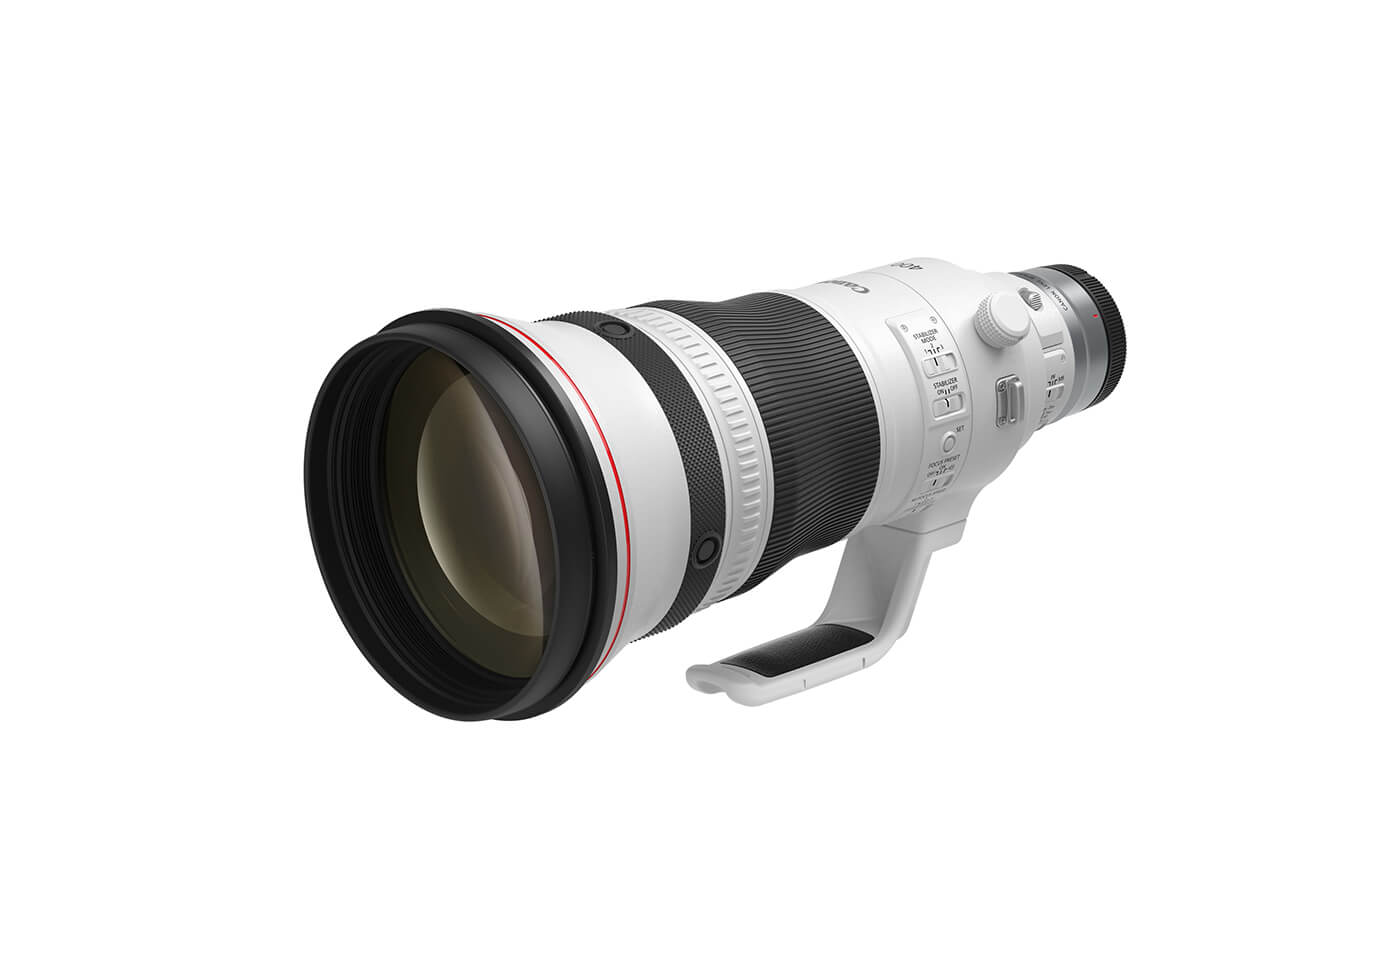 Front profile image of the RF 400mm f/2.8 L IS USM telephoto lens